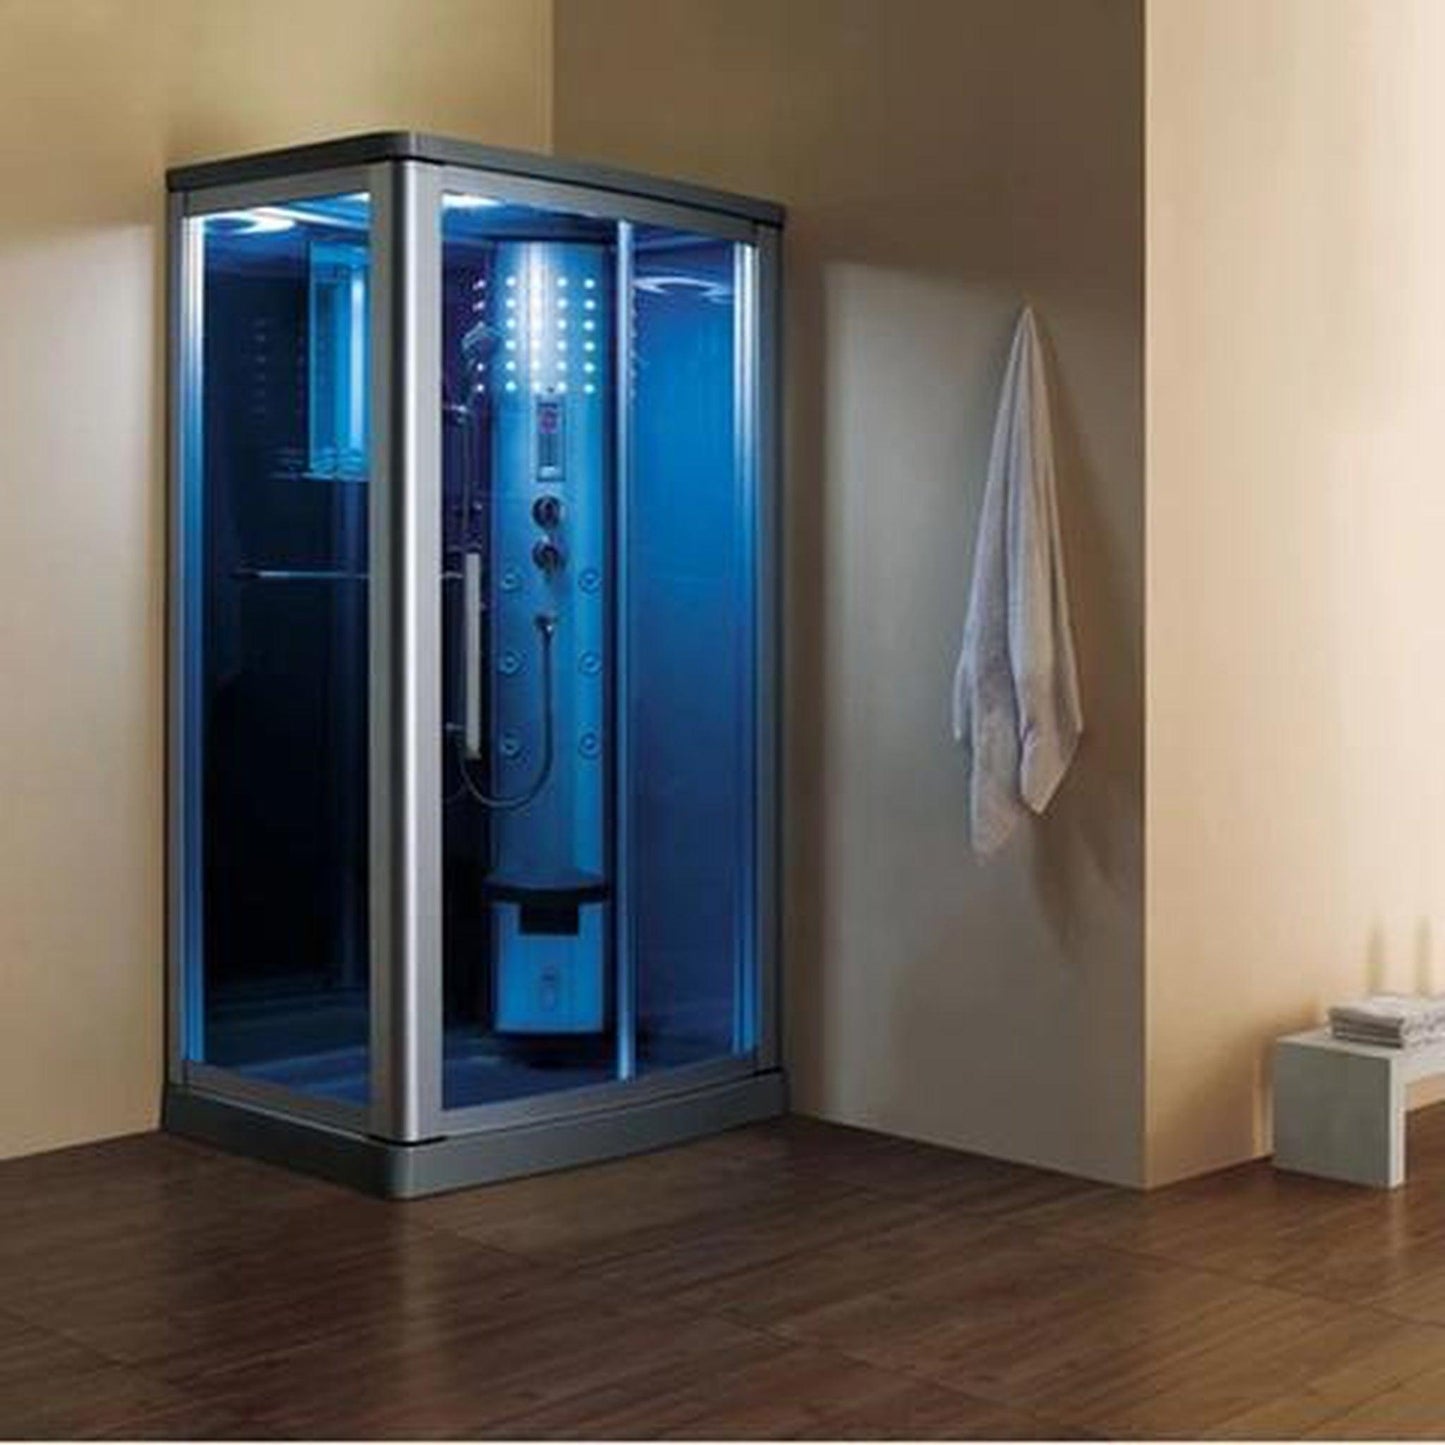 Mesa 45" x 35" x 85" Blue Tempered Glass Freestanding Walk In Steam Shower With Right-Hand Control Panel Configuration, 3kW Steam Generator and 6-Acupuncture Water Body Jets